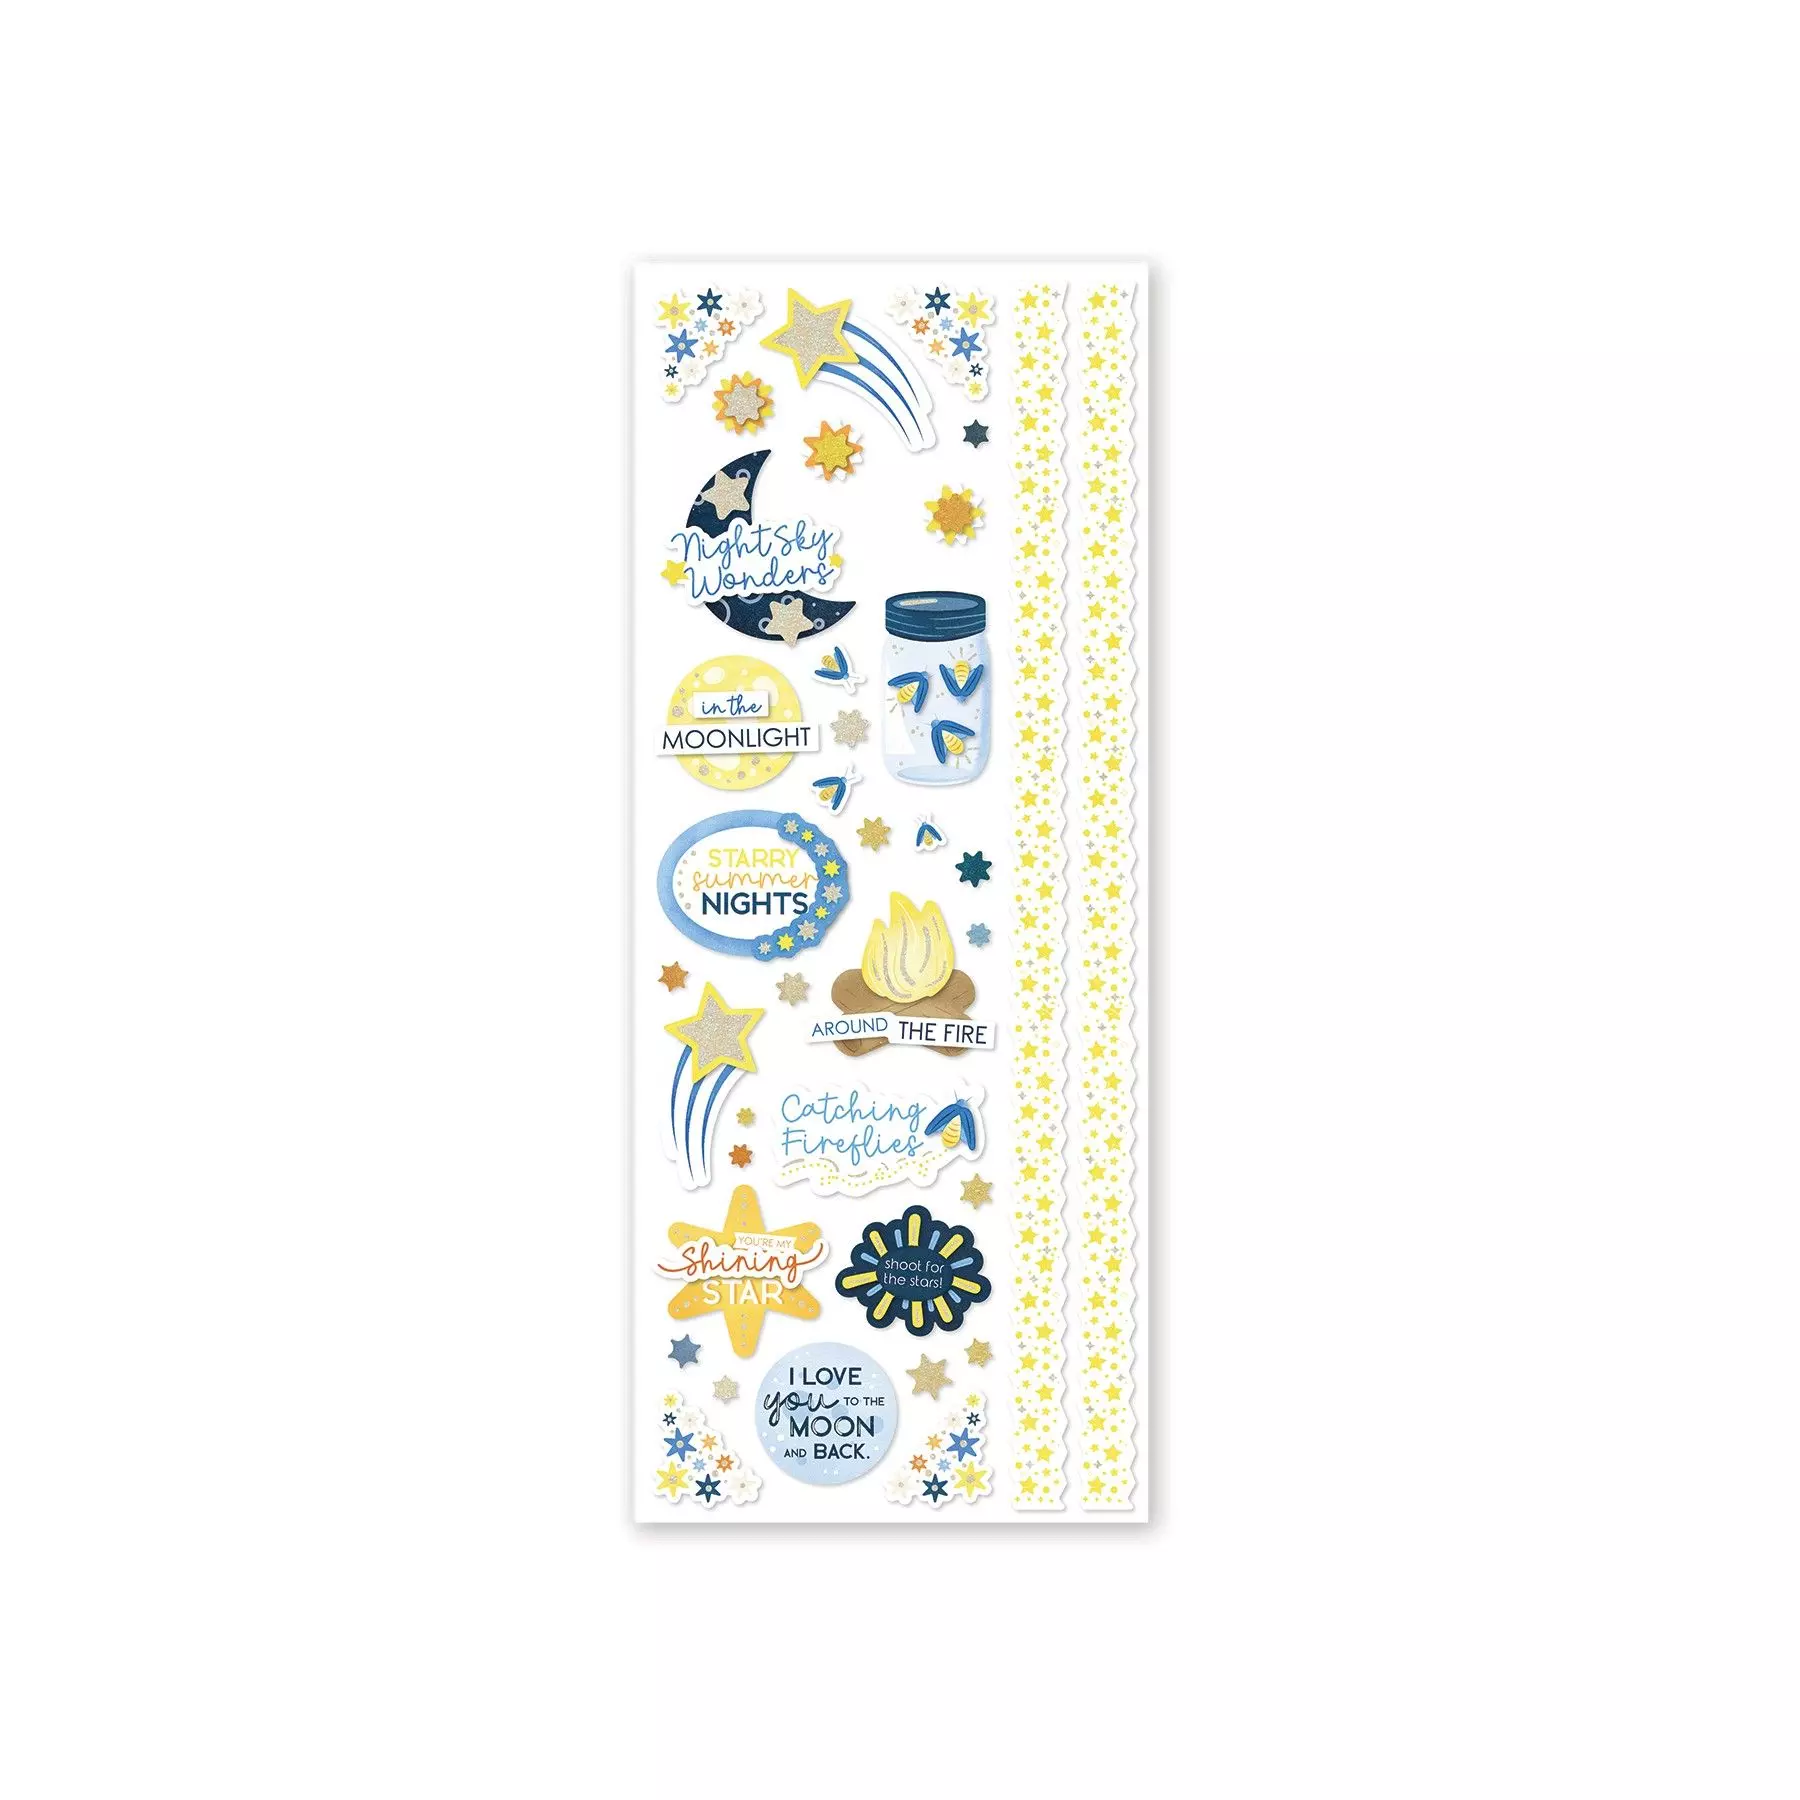 Creative Memories Scrapbooking Supplies products for sale